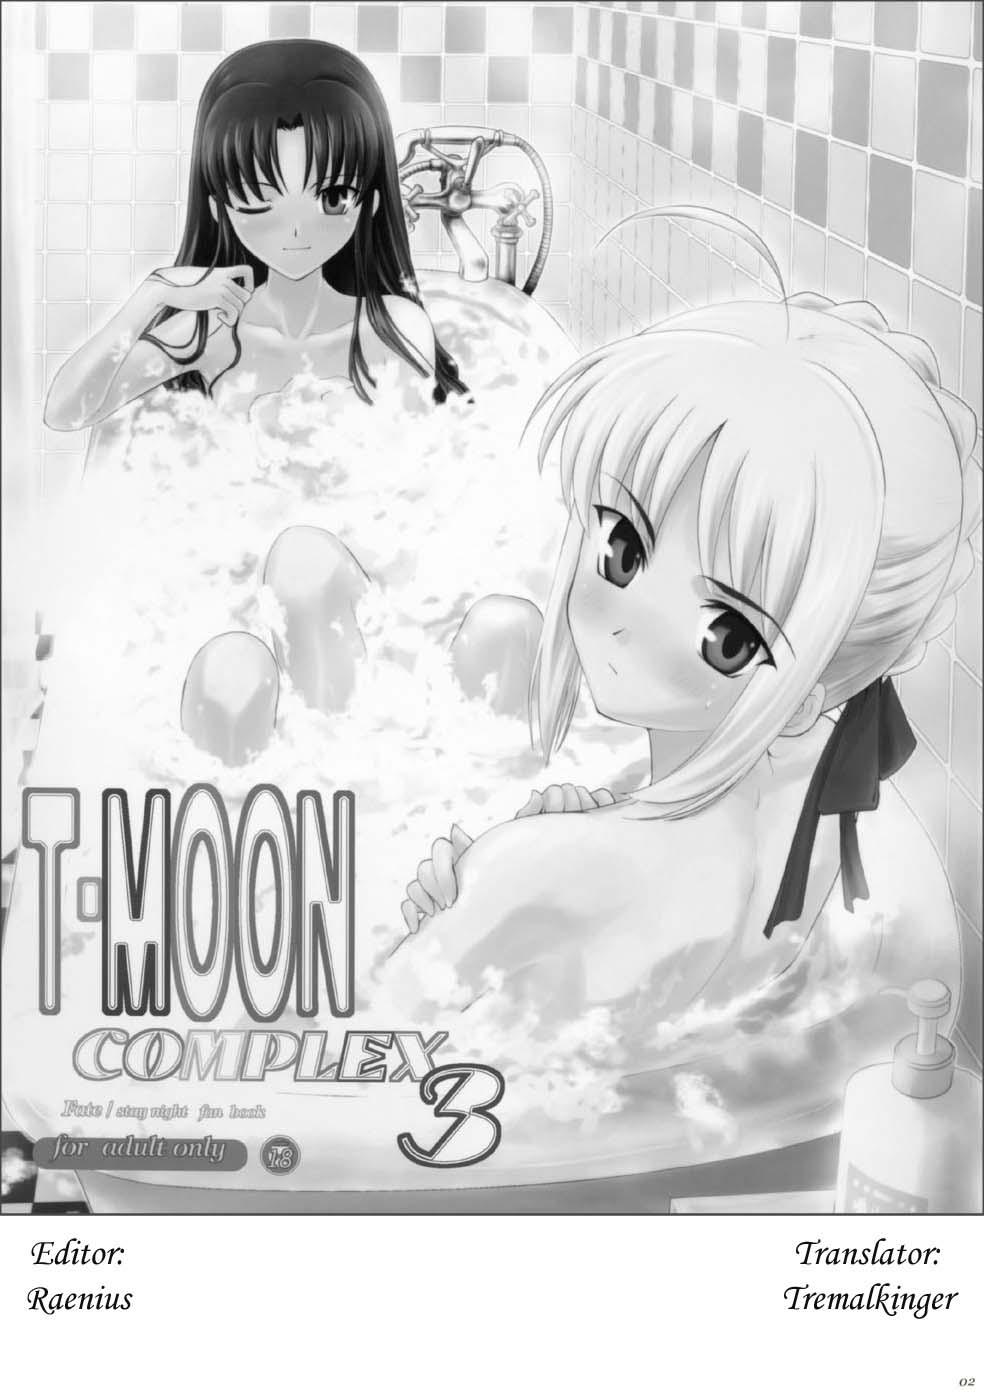 Hardcore Sex T-MOON COMPLEX 3 - Fate stay night Verified Profile - Page 2